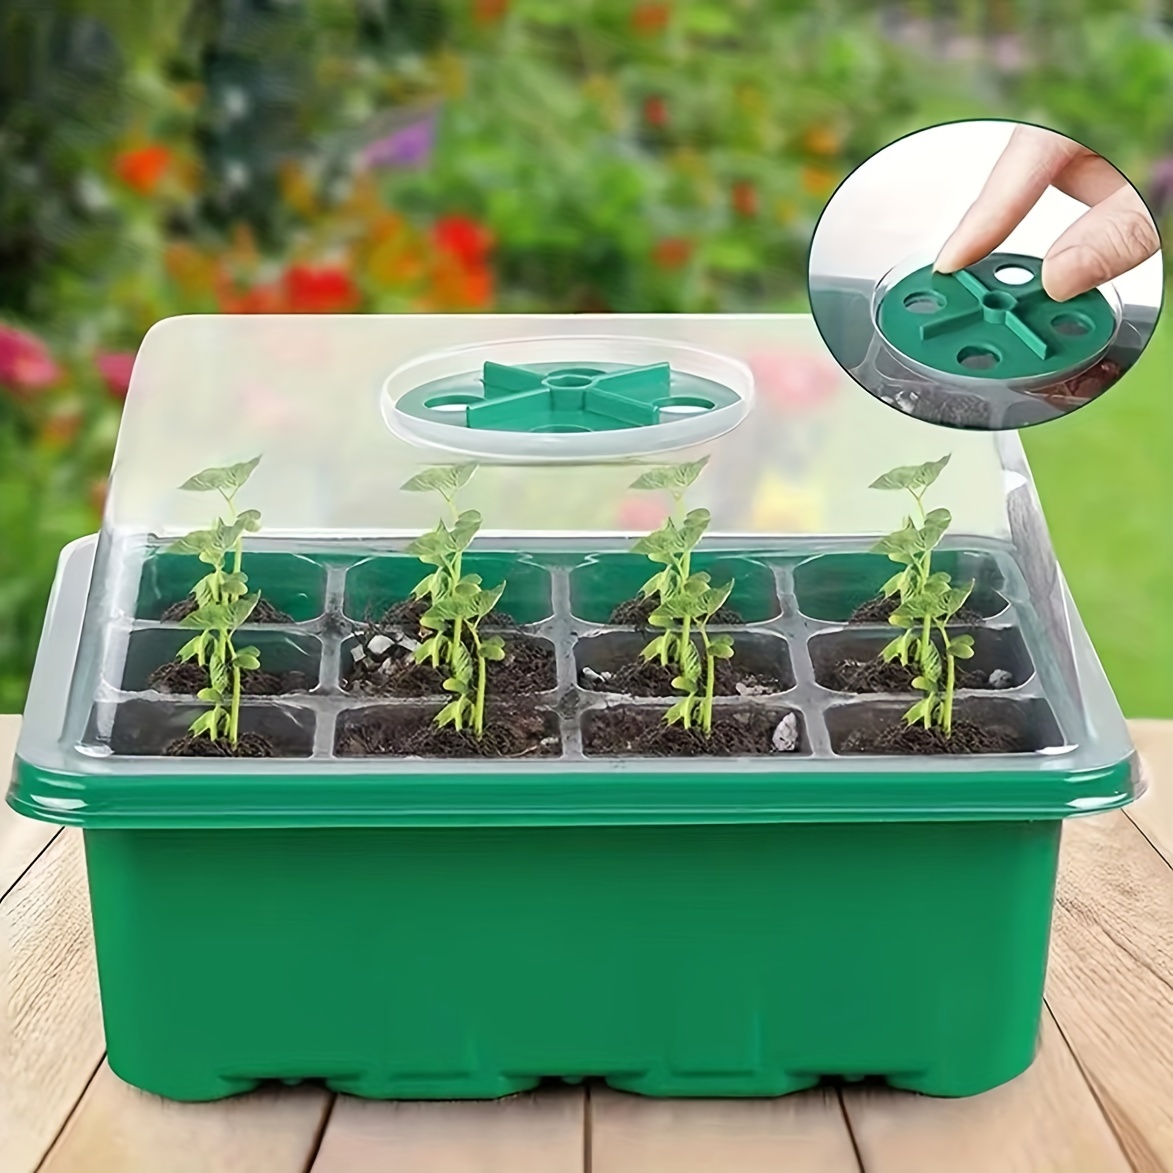 6pcs Reusable Seed Starter Kit, 72 Cells Seed Starter Trays, Silicone  Seedling Starter Trays for Starting Plant Seeds with Flexible pop-Out  Cells